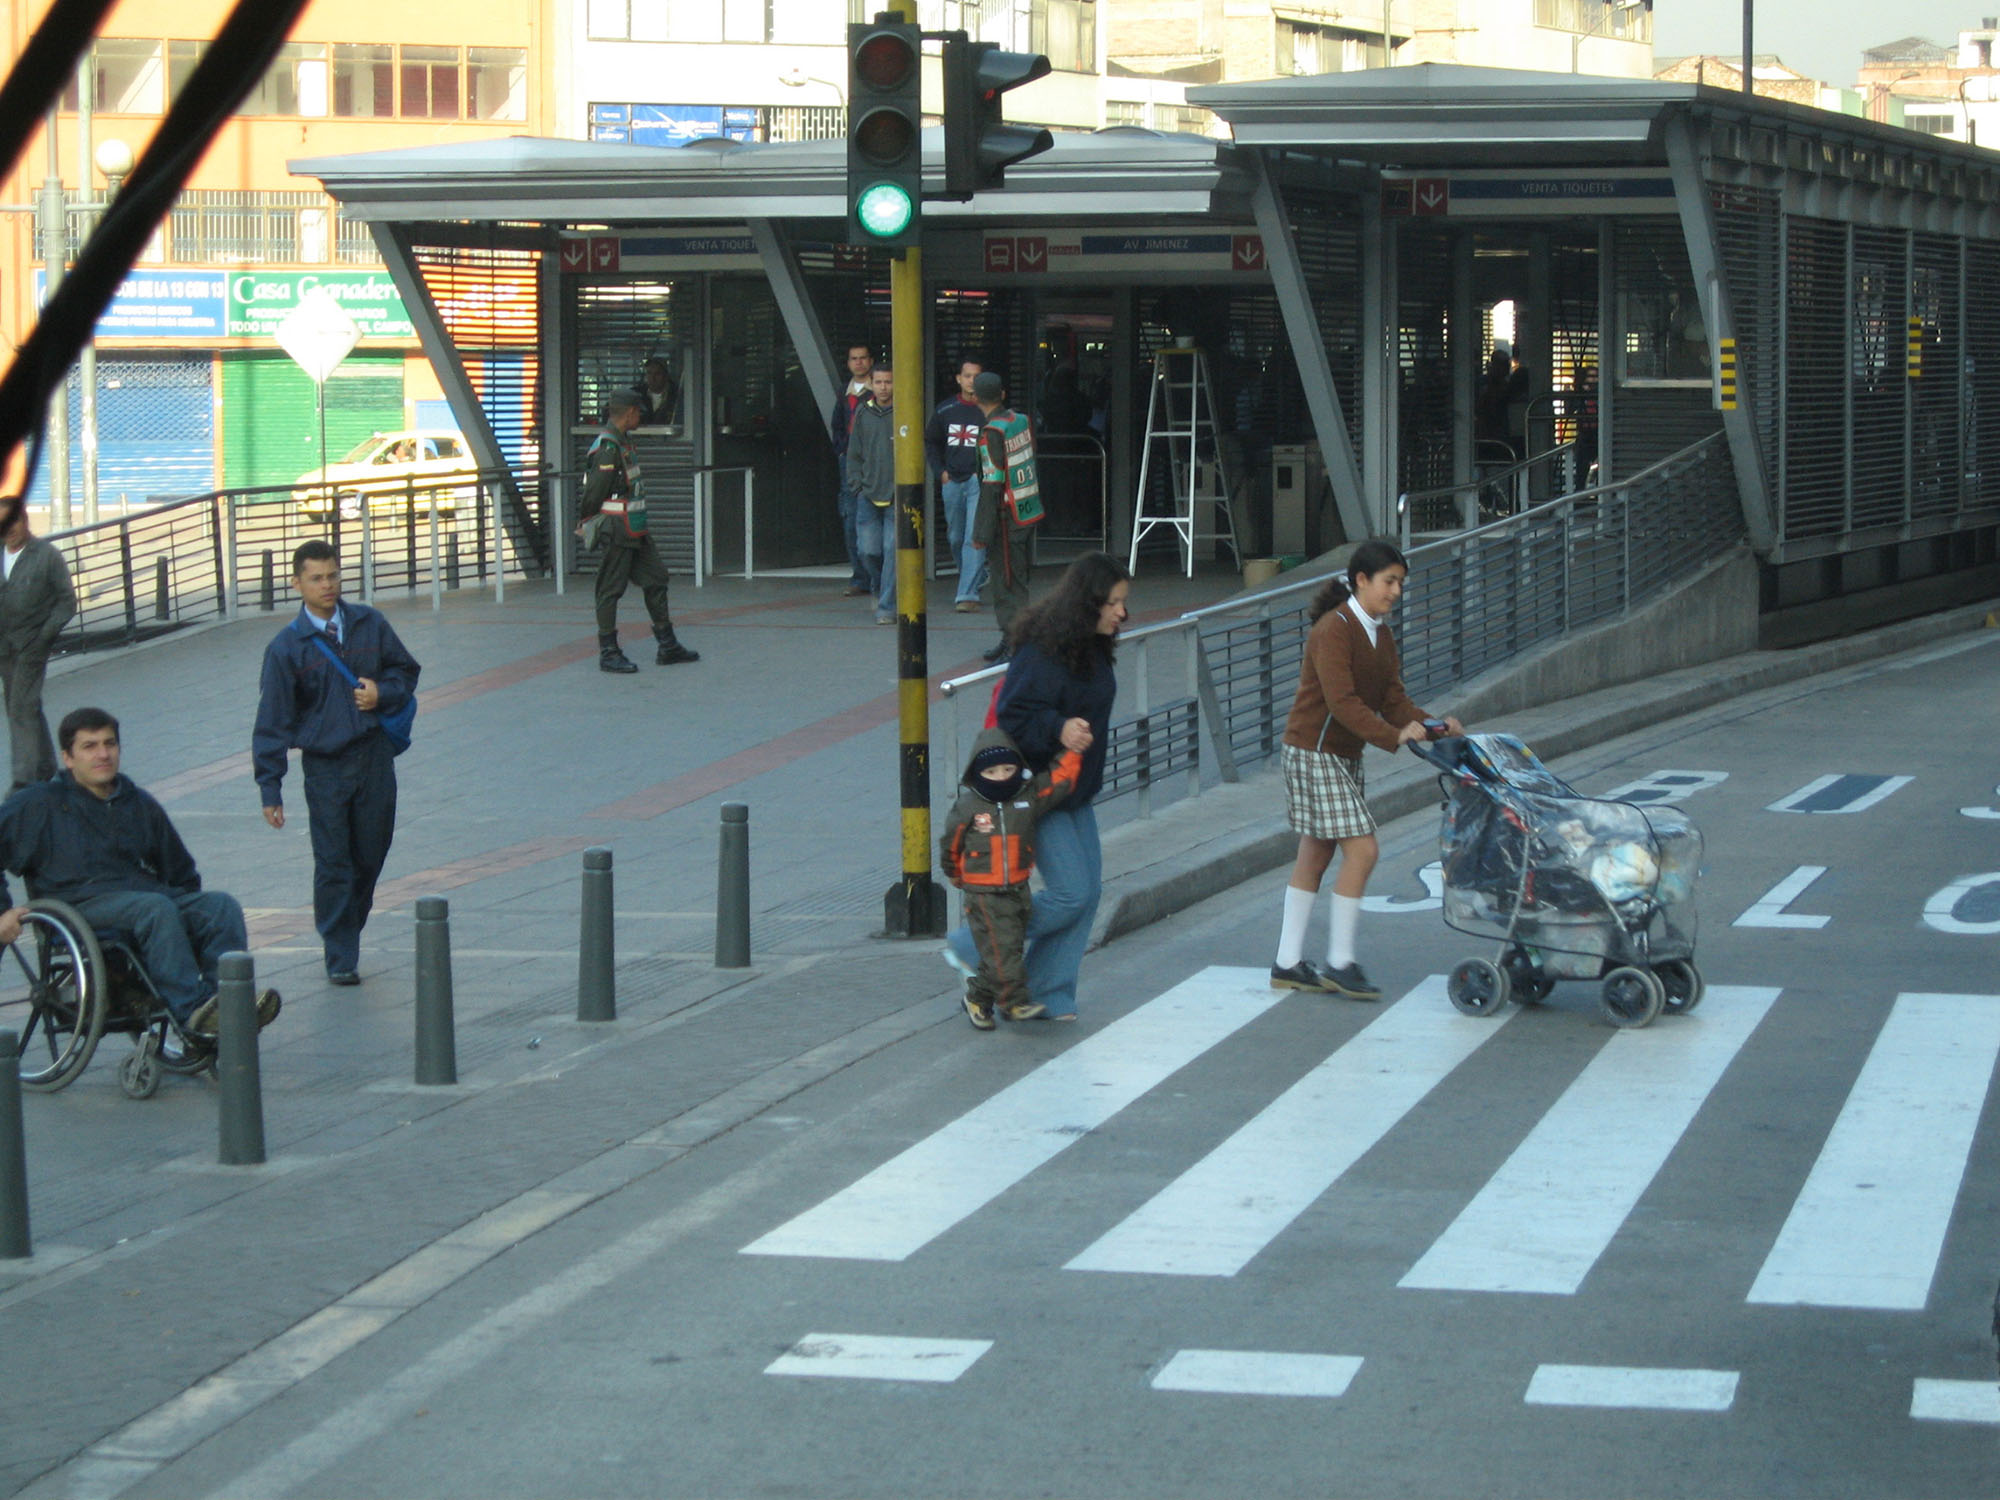 Fig. 29.15 Designing for the physically disabled also helps families with strollers and others carrying bicycles or large packages as shown at the Avenida Jimenez station in Bogotá.